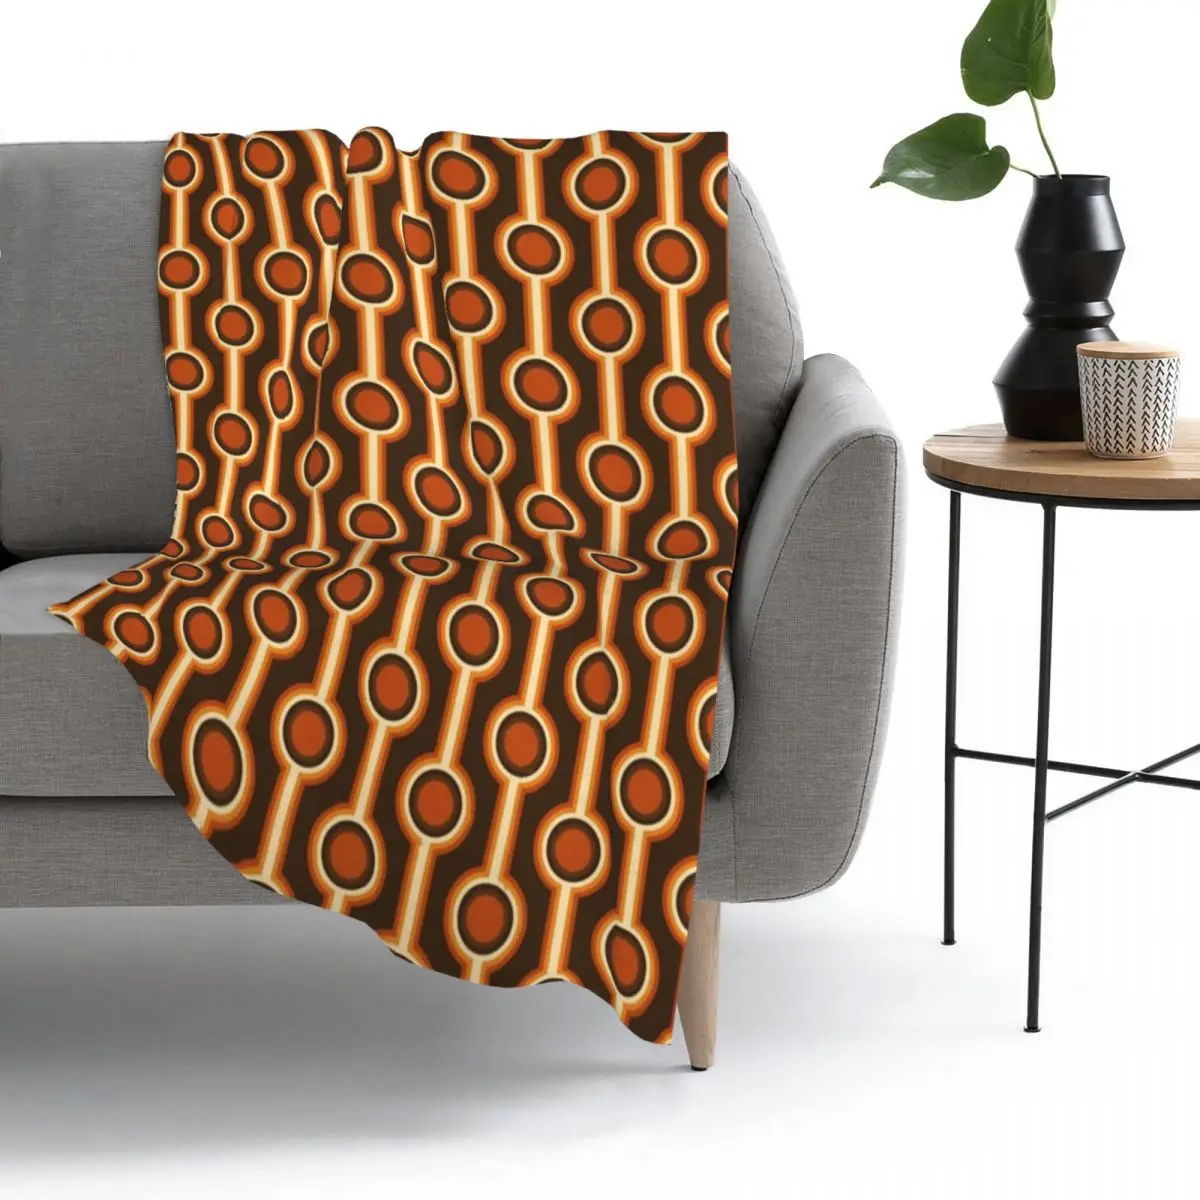 

70s Retro Connected Balls In Orange And Brown Tones Pattern Blankets Fleece Multi-function Throw Blankets Couch Travel Throws